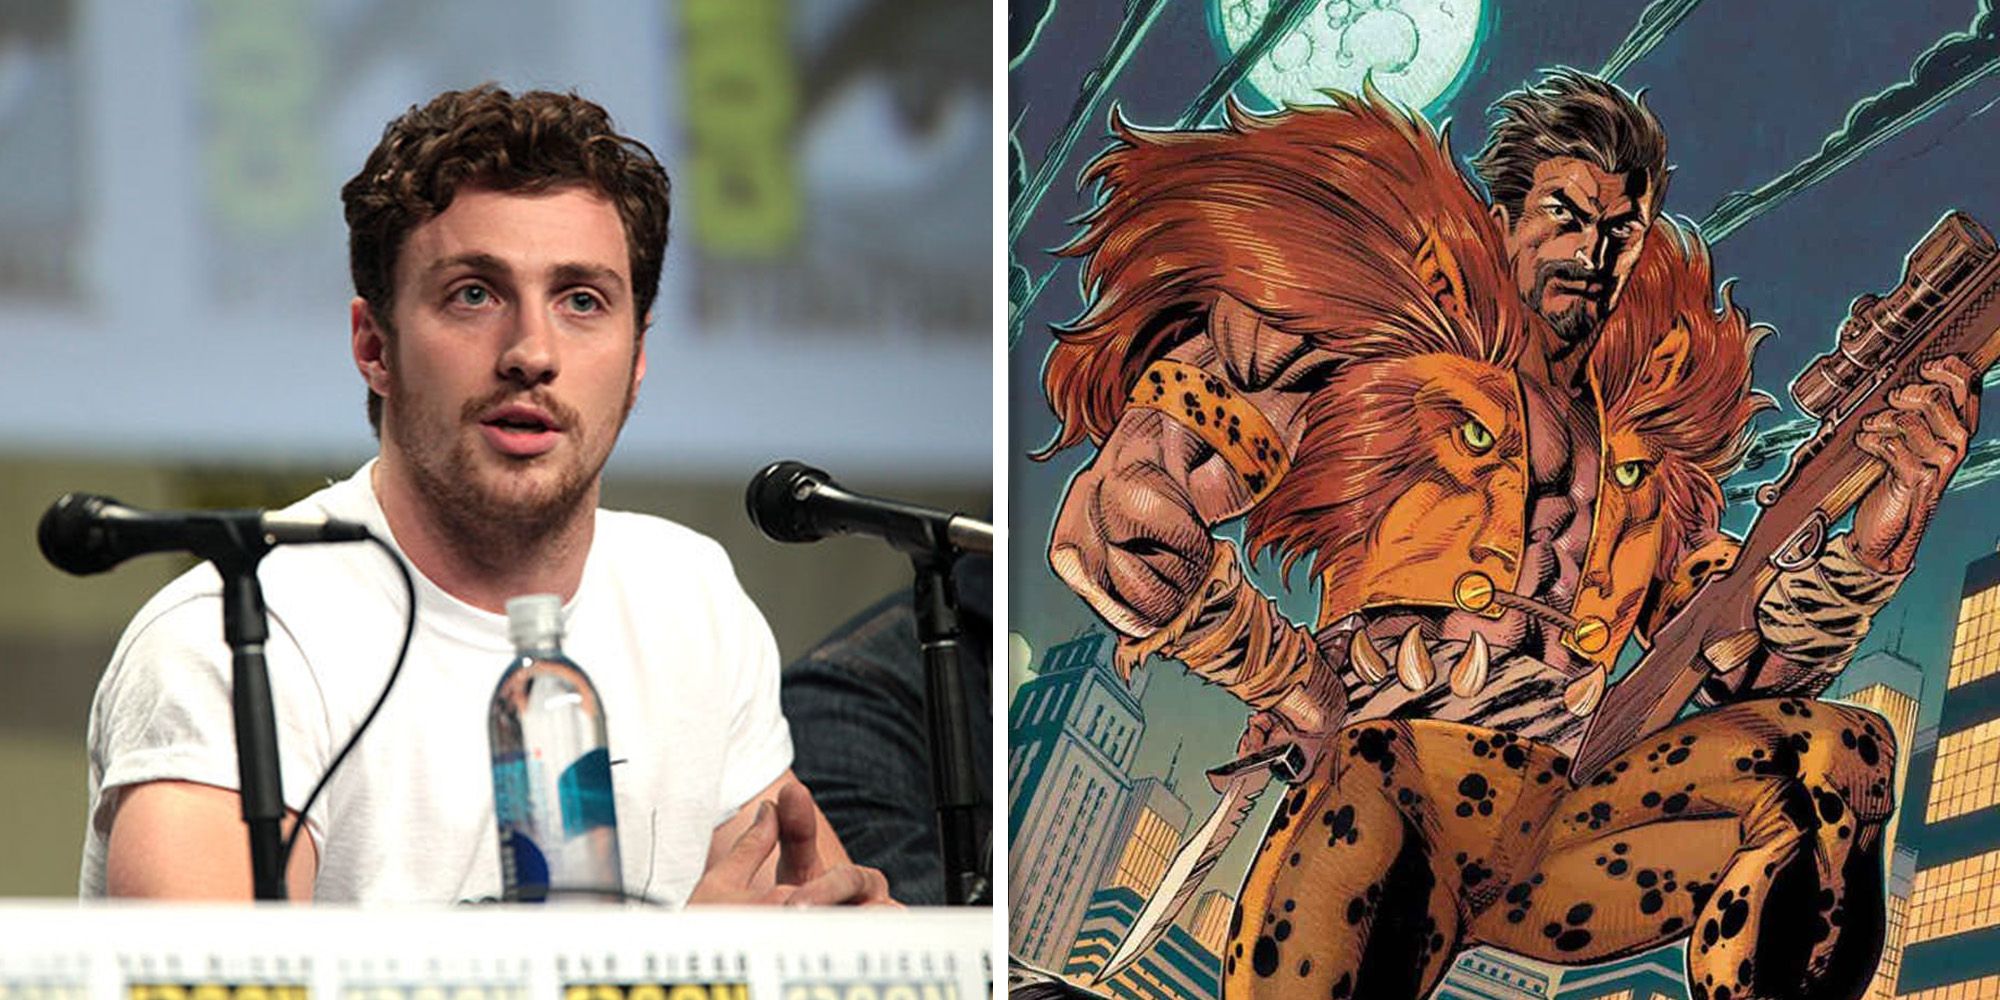 Split image: Aaron Taylor-Johnson at ComicCon on left. Kraven the Hunter holding a rifle on right.